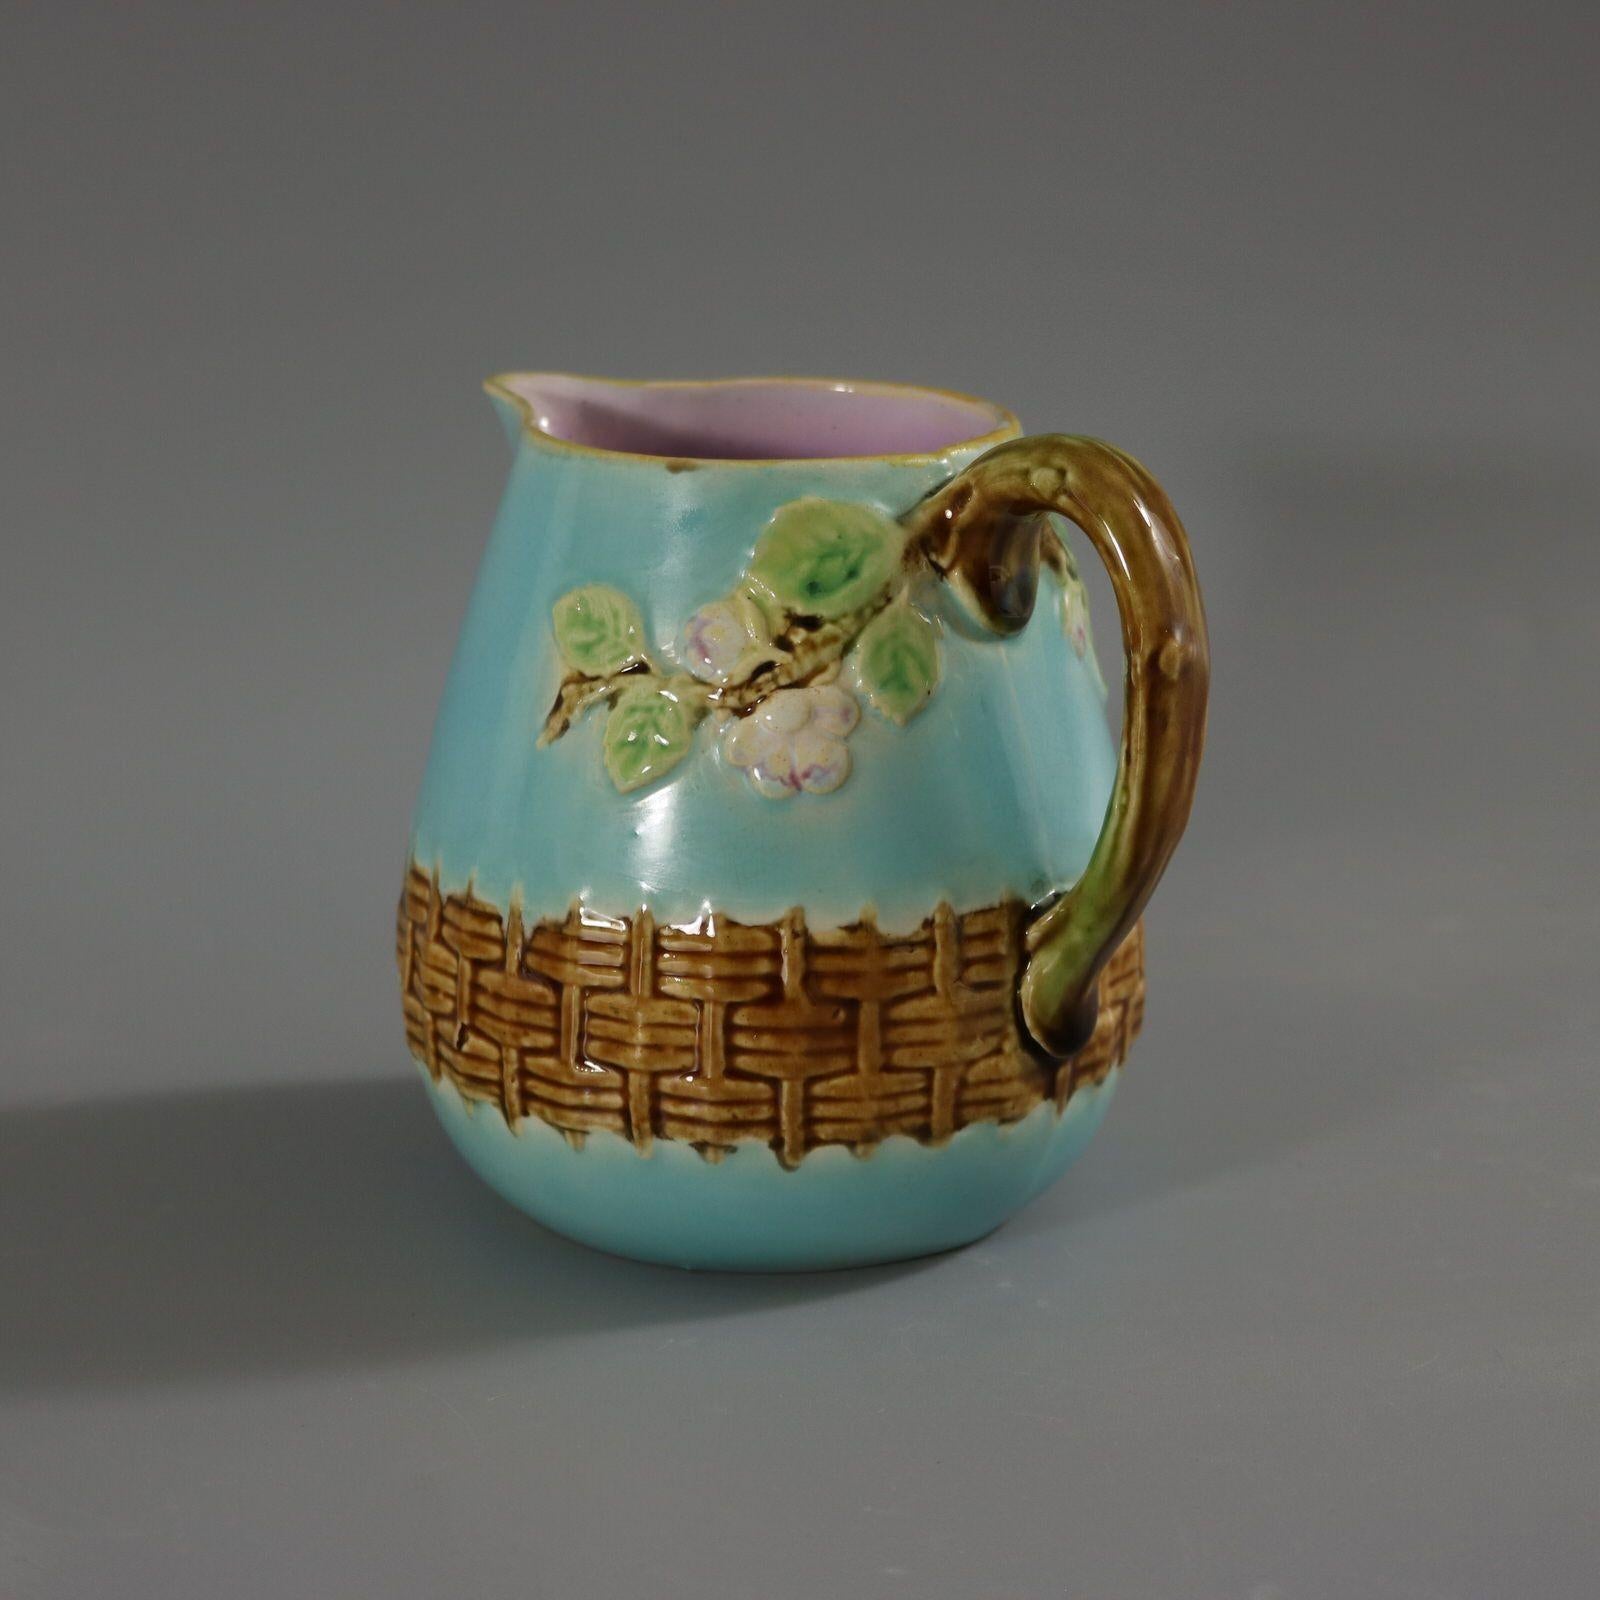 George Jones Majolica jug/creamer which features a branch handle, with blossom branching off on either side and a basket weave border to bottom. Colouration: turquoise, brown, green, are predominant. Bears a pattern number, '3304'. Part of a teaset.